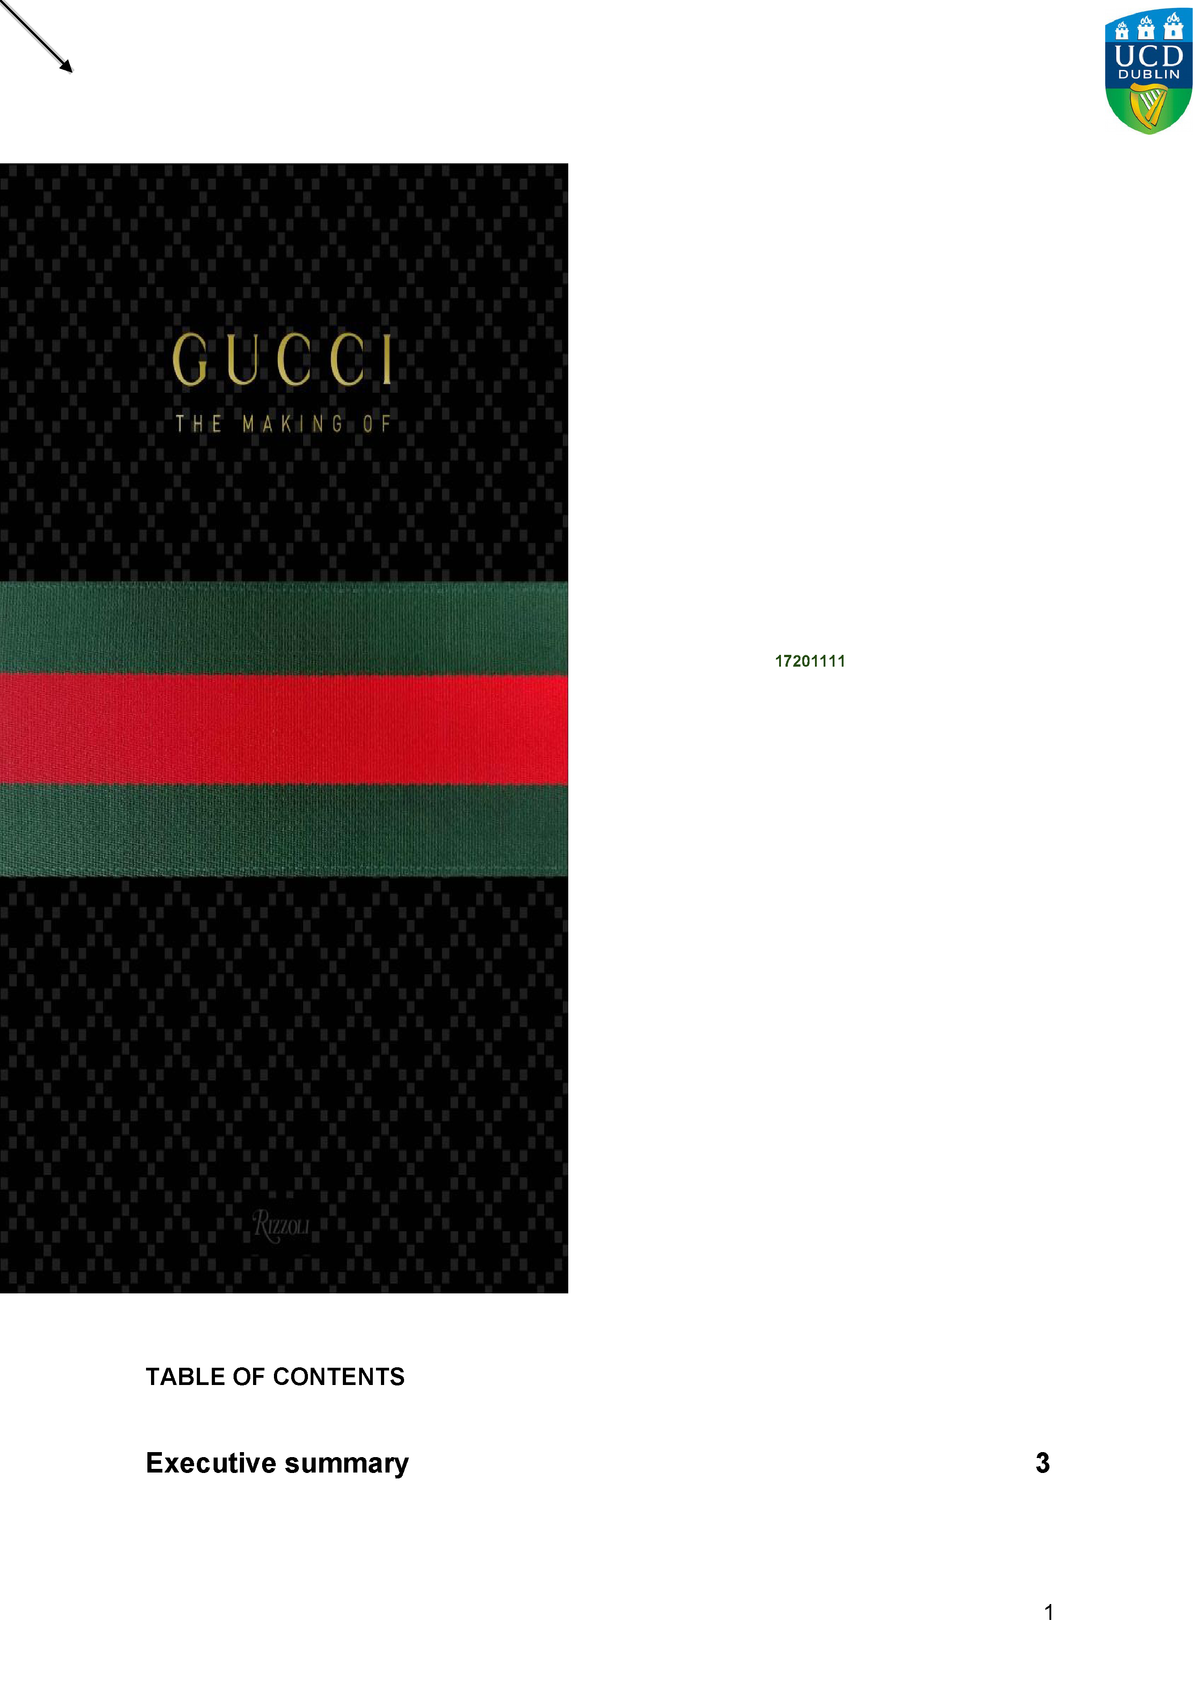 case study about gucci